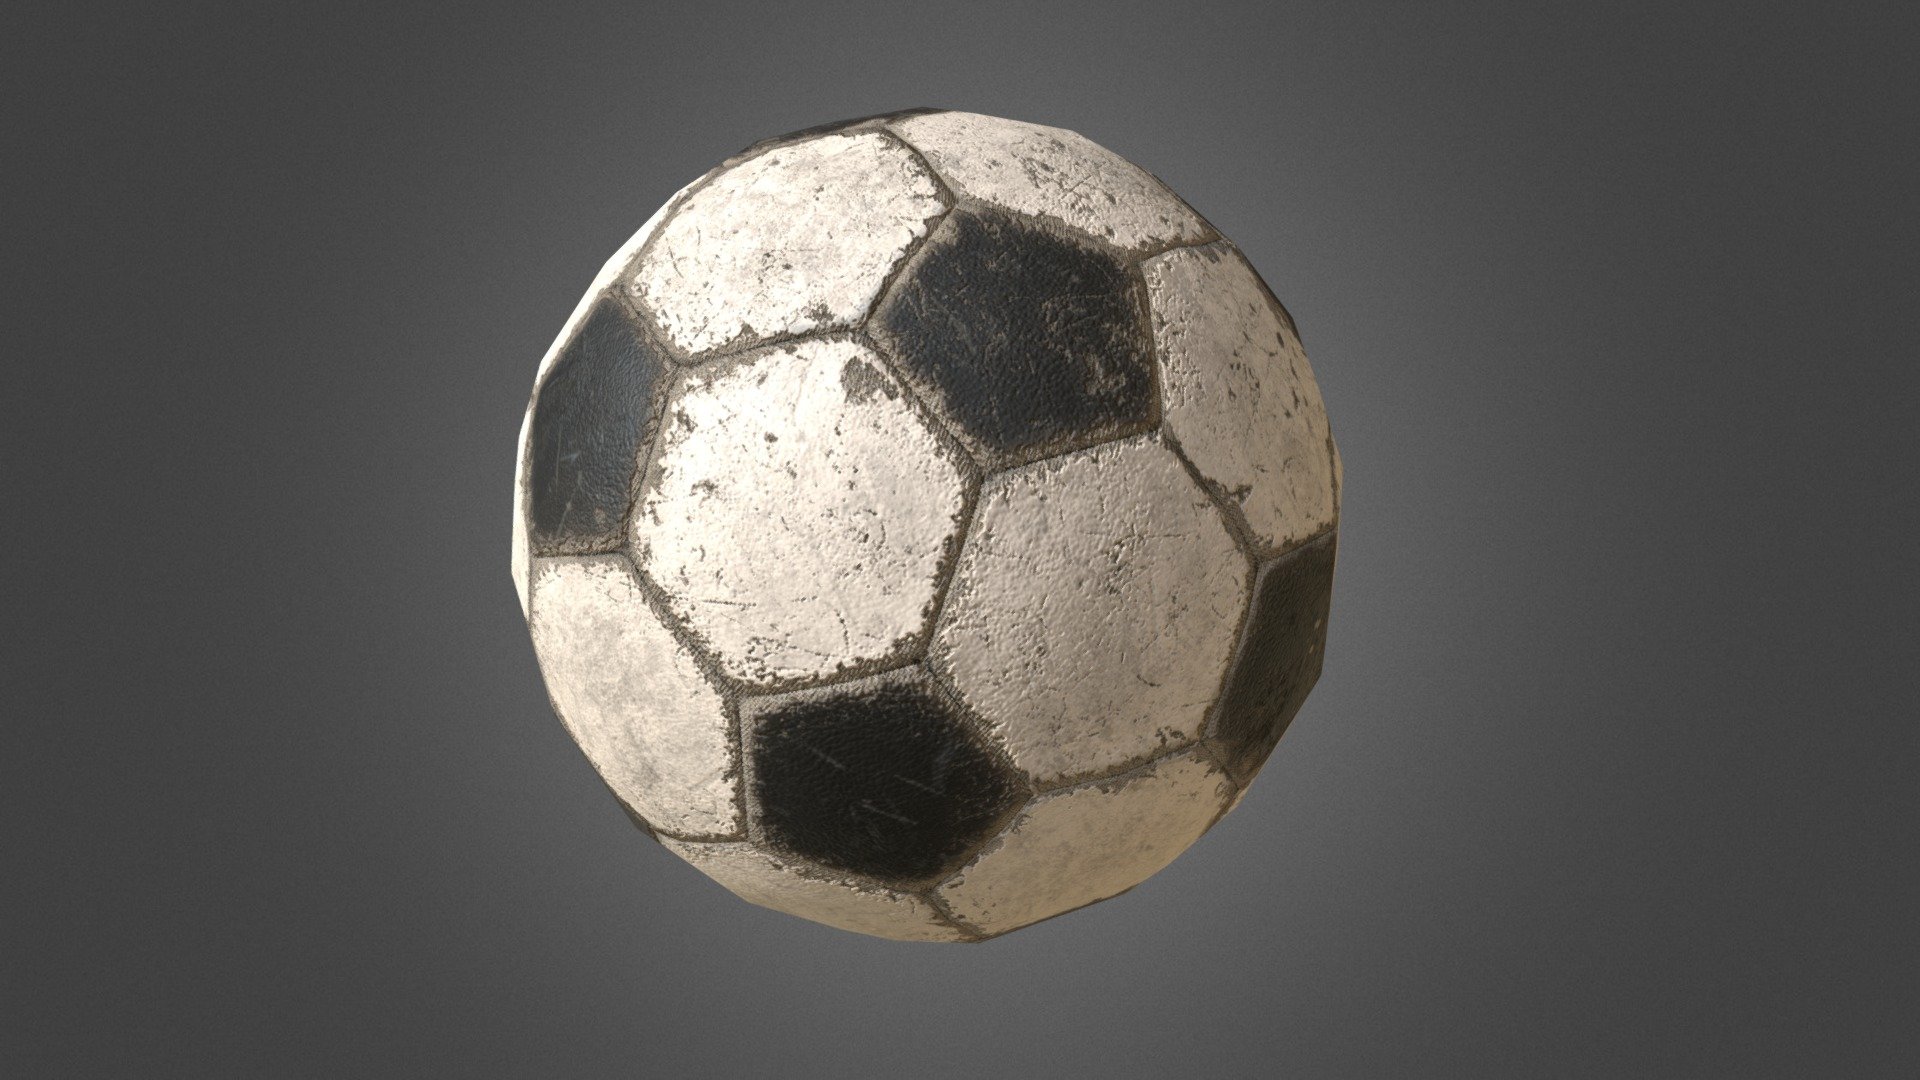 Low poly, PBR, game ready 3D model of Old Football Ball FBX format Texture Size: 2048x2048 - Old Football Ball Low Poly PBR Model - 3D model by AleksandrKorostyliov 3d model